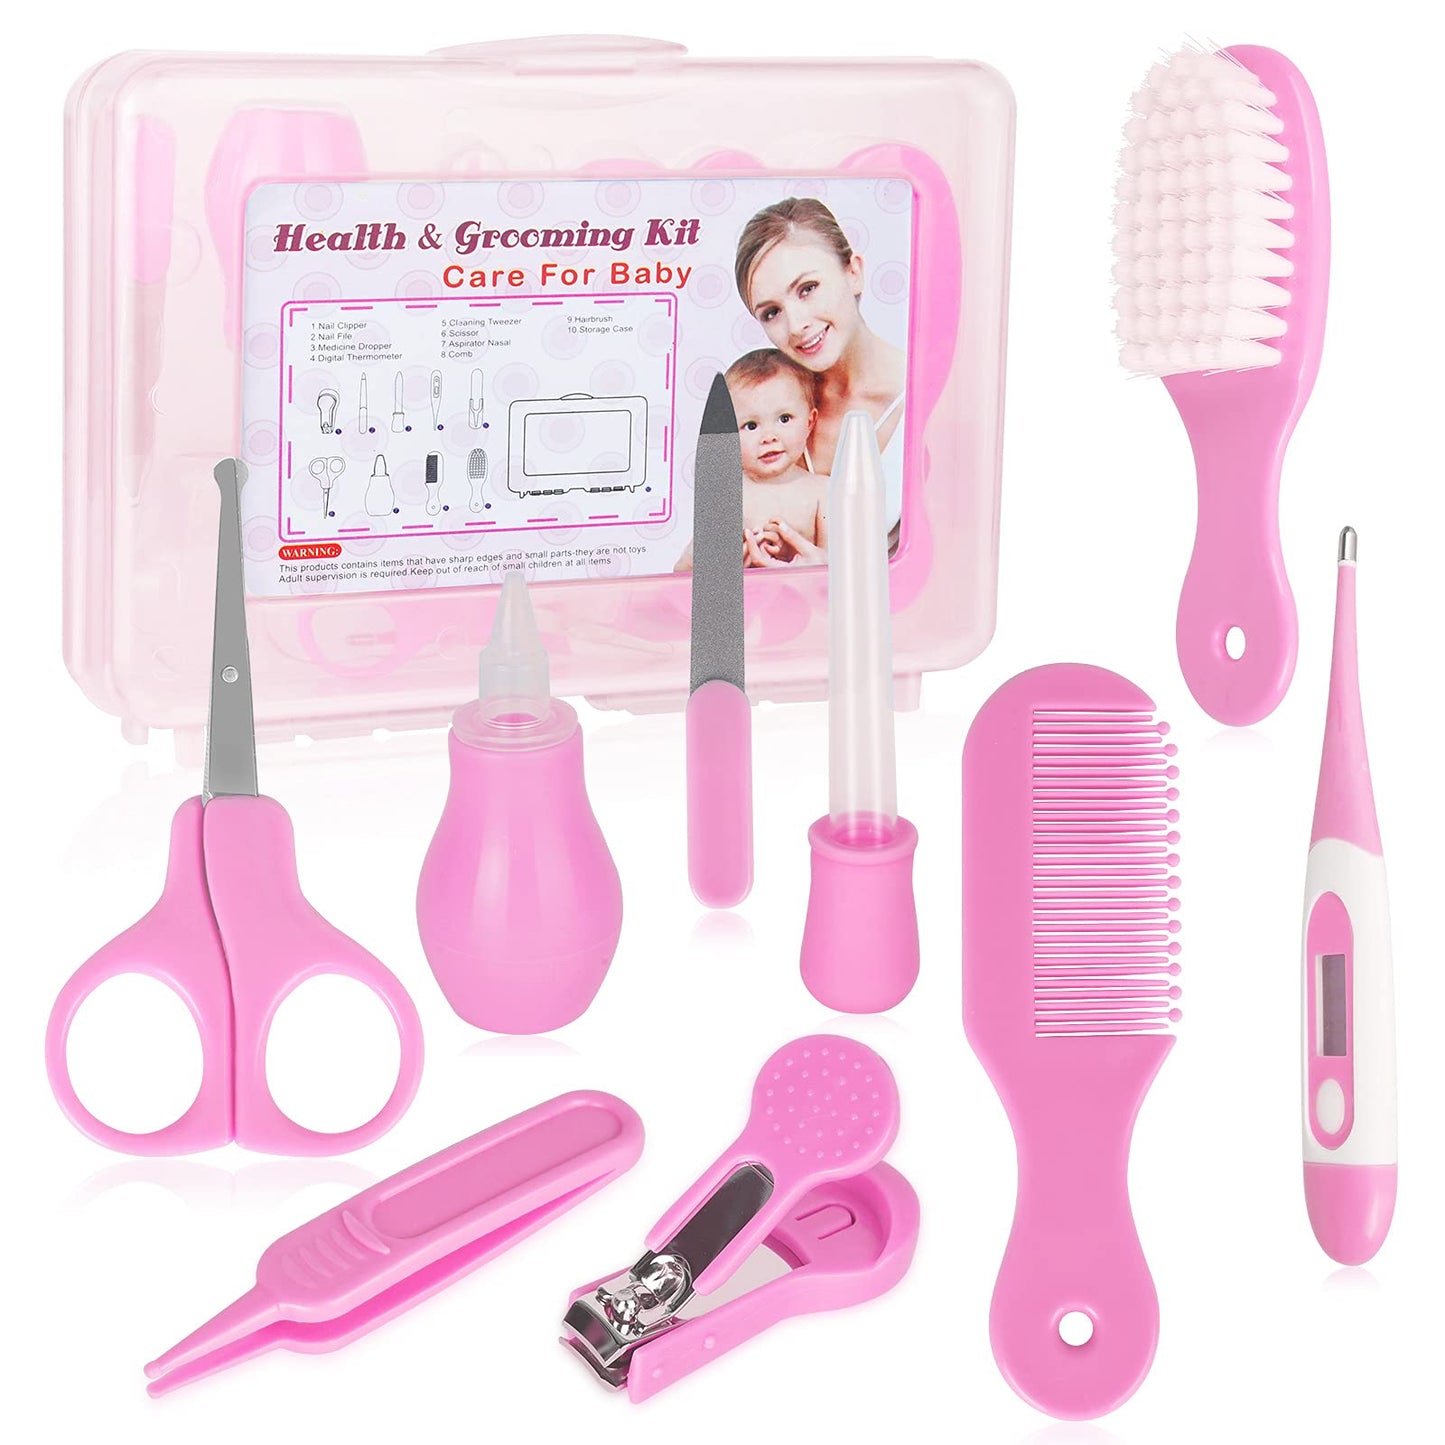 Baby Grooming Kit, Baby Care Items, Baby Care Essentials Set, Baby Supplies Set, 9PCS Baby Health Care Set Portable Baby Care Kit, Safety Cutter Baby Nail Kit for Newborn, Infant & Toddler(Pink)